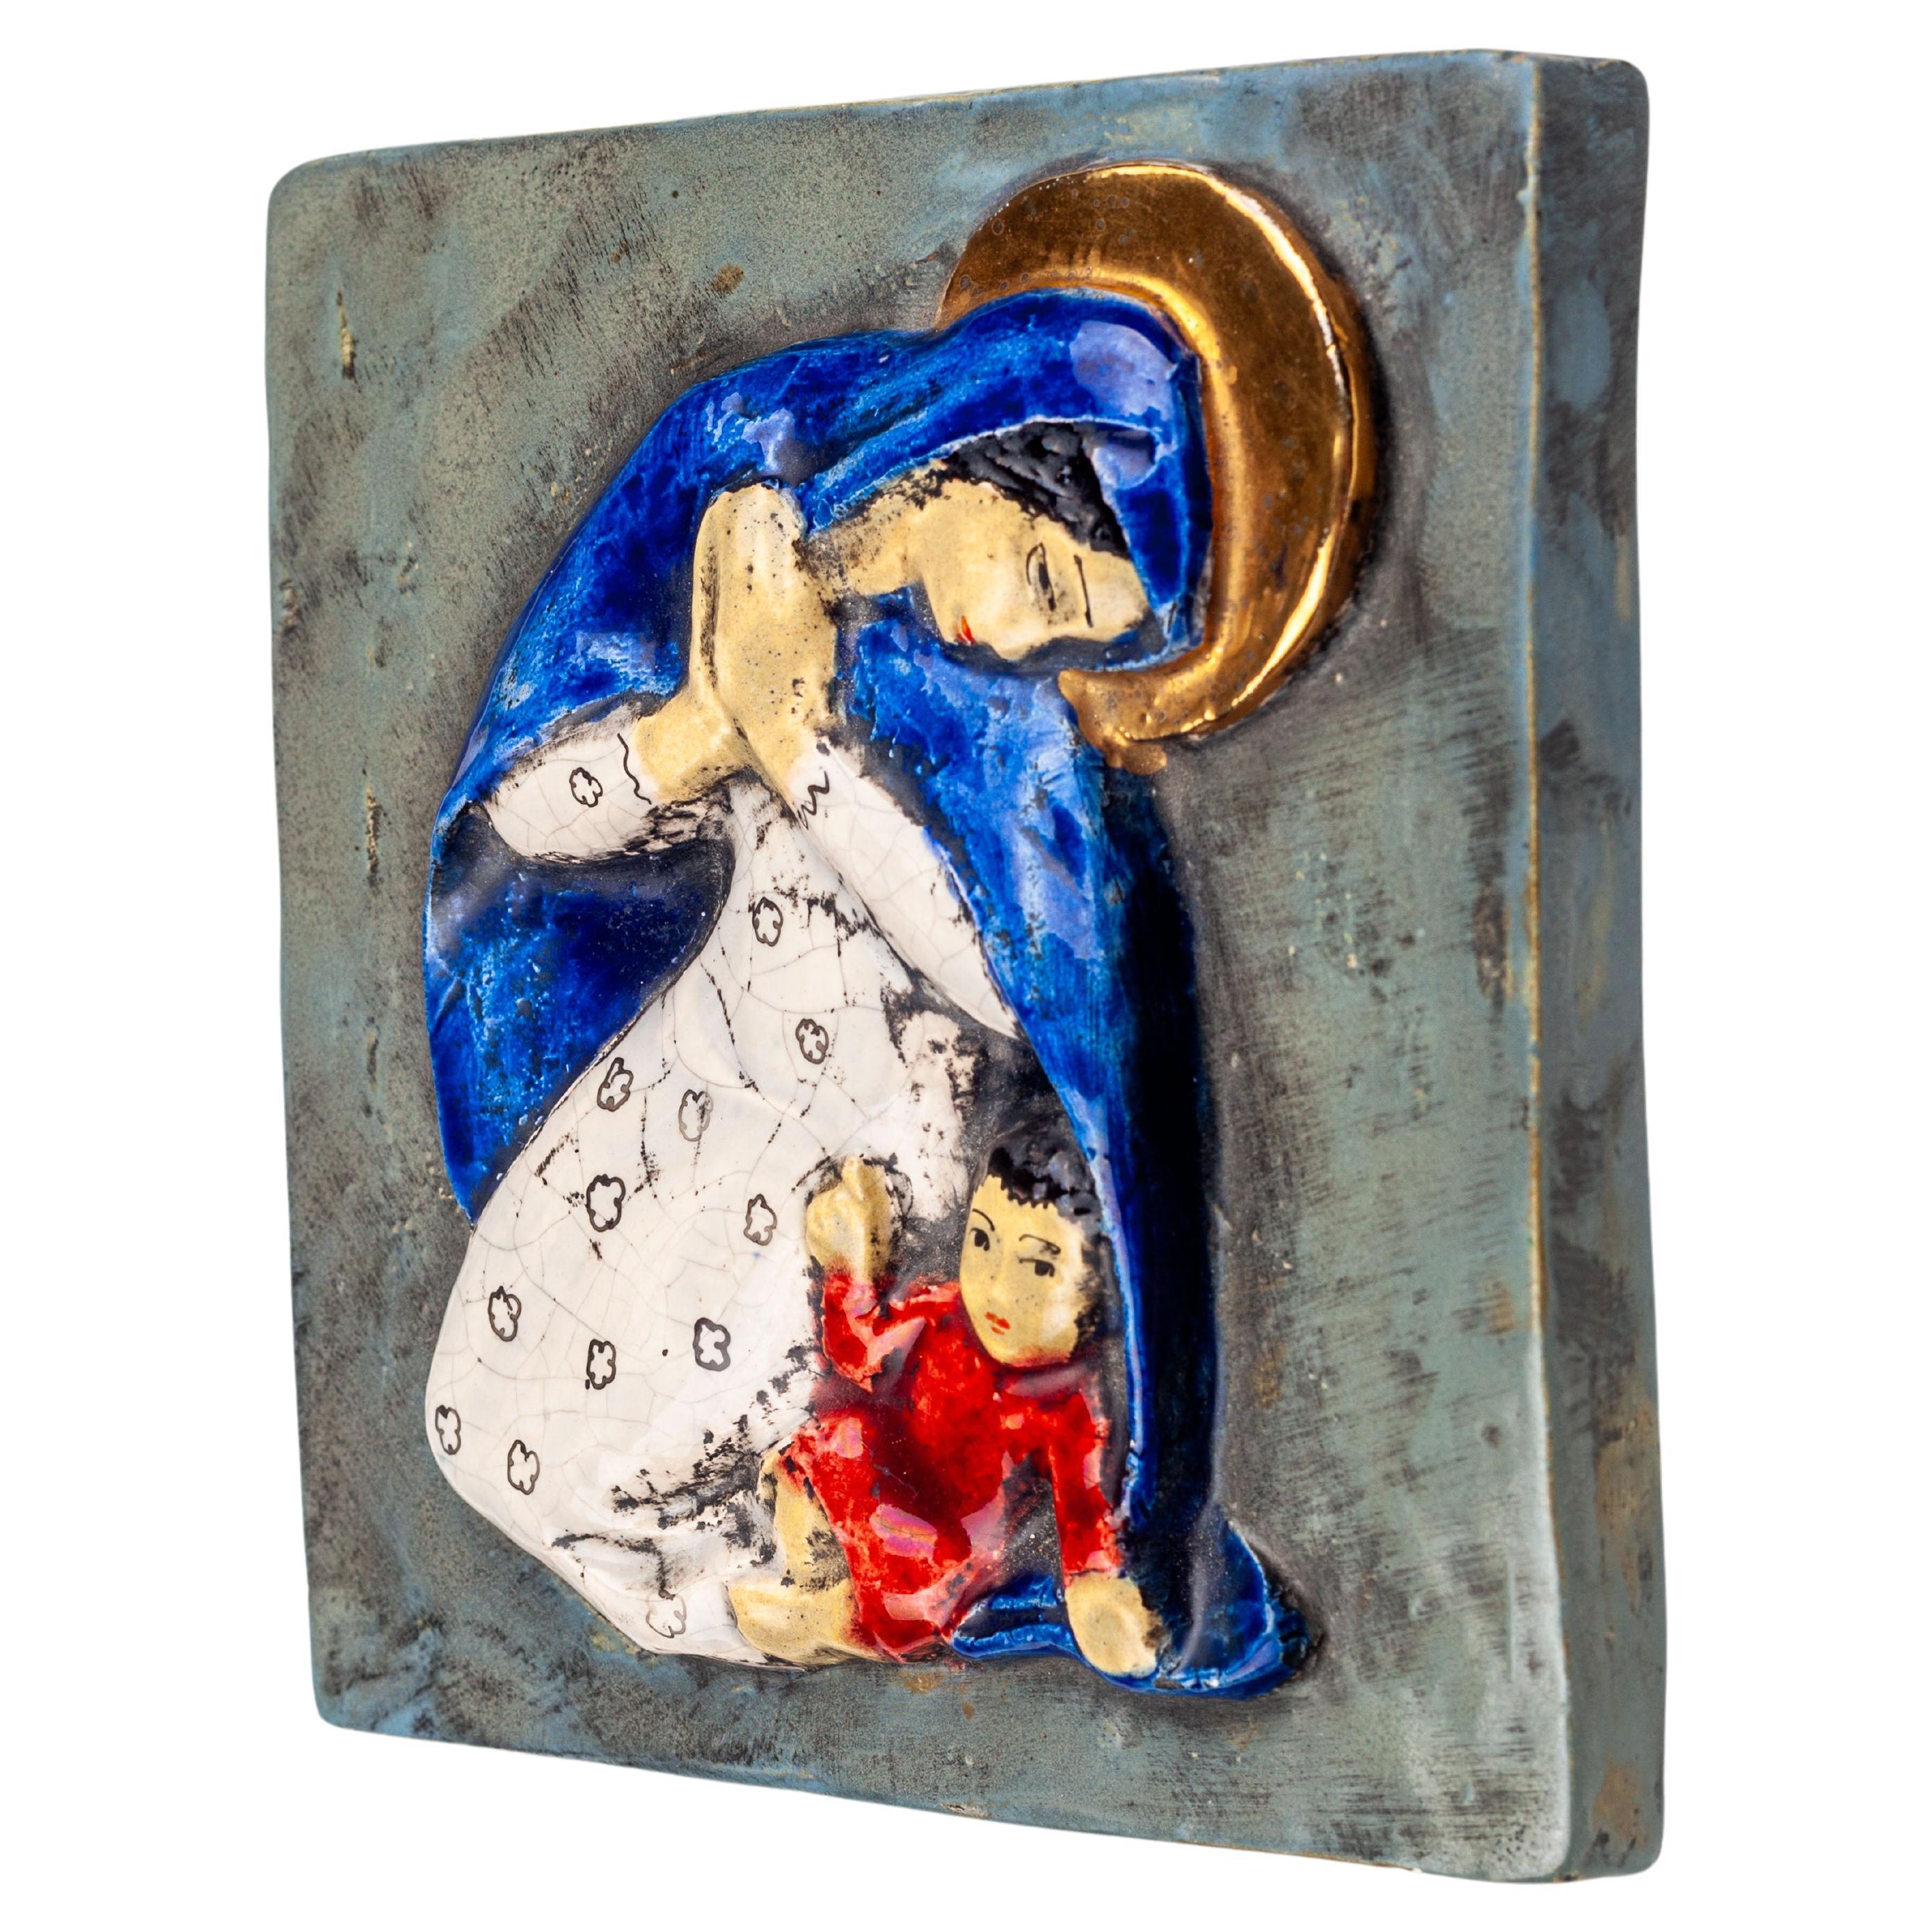 Modernist Virgin Mary and Child Jesus Wall Ceramic Decoration Handmade in Europe